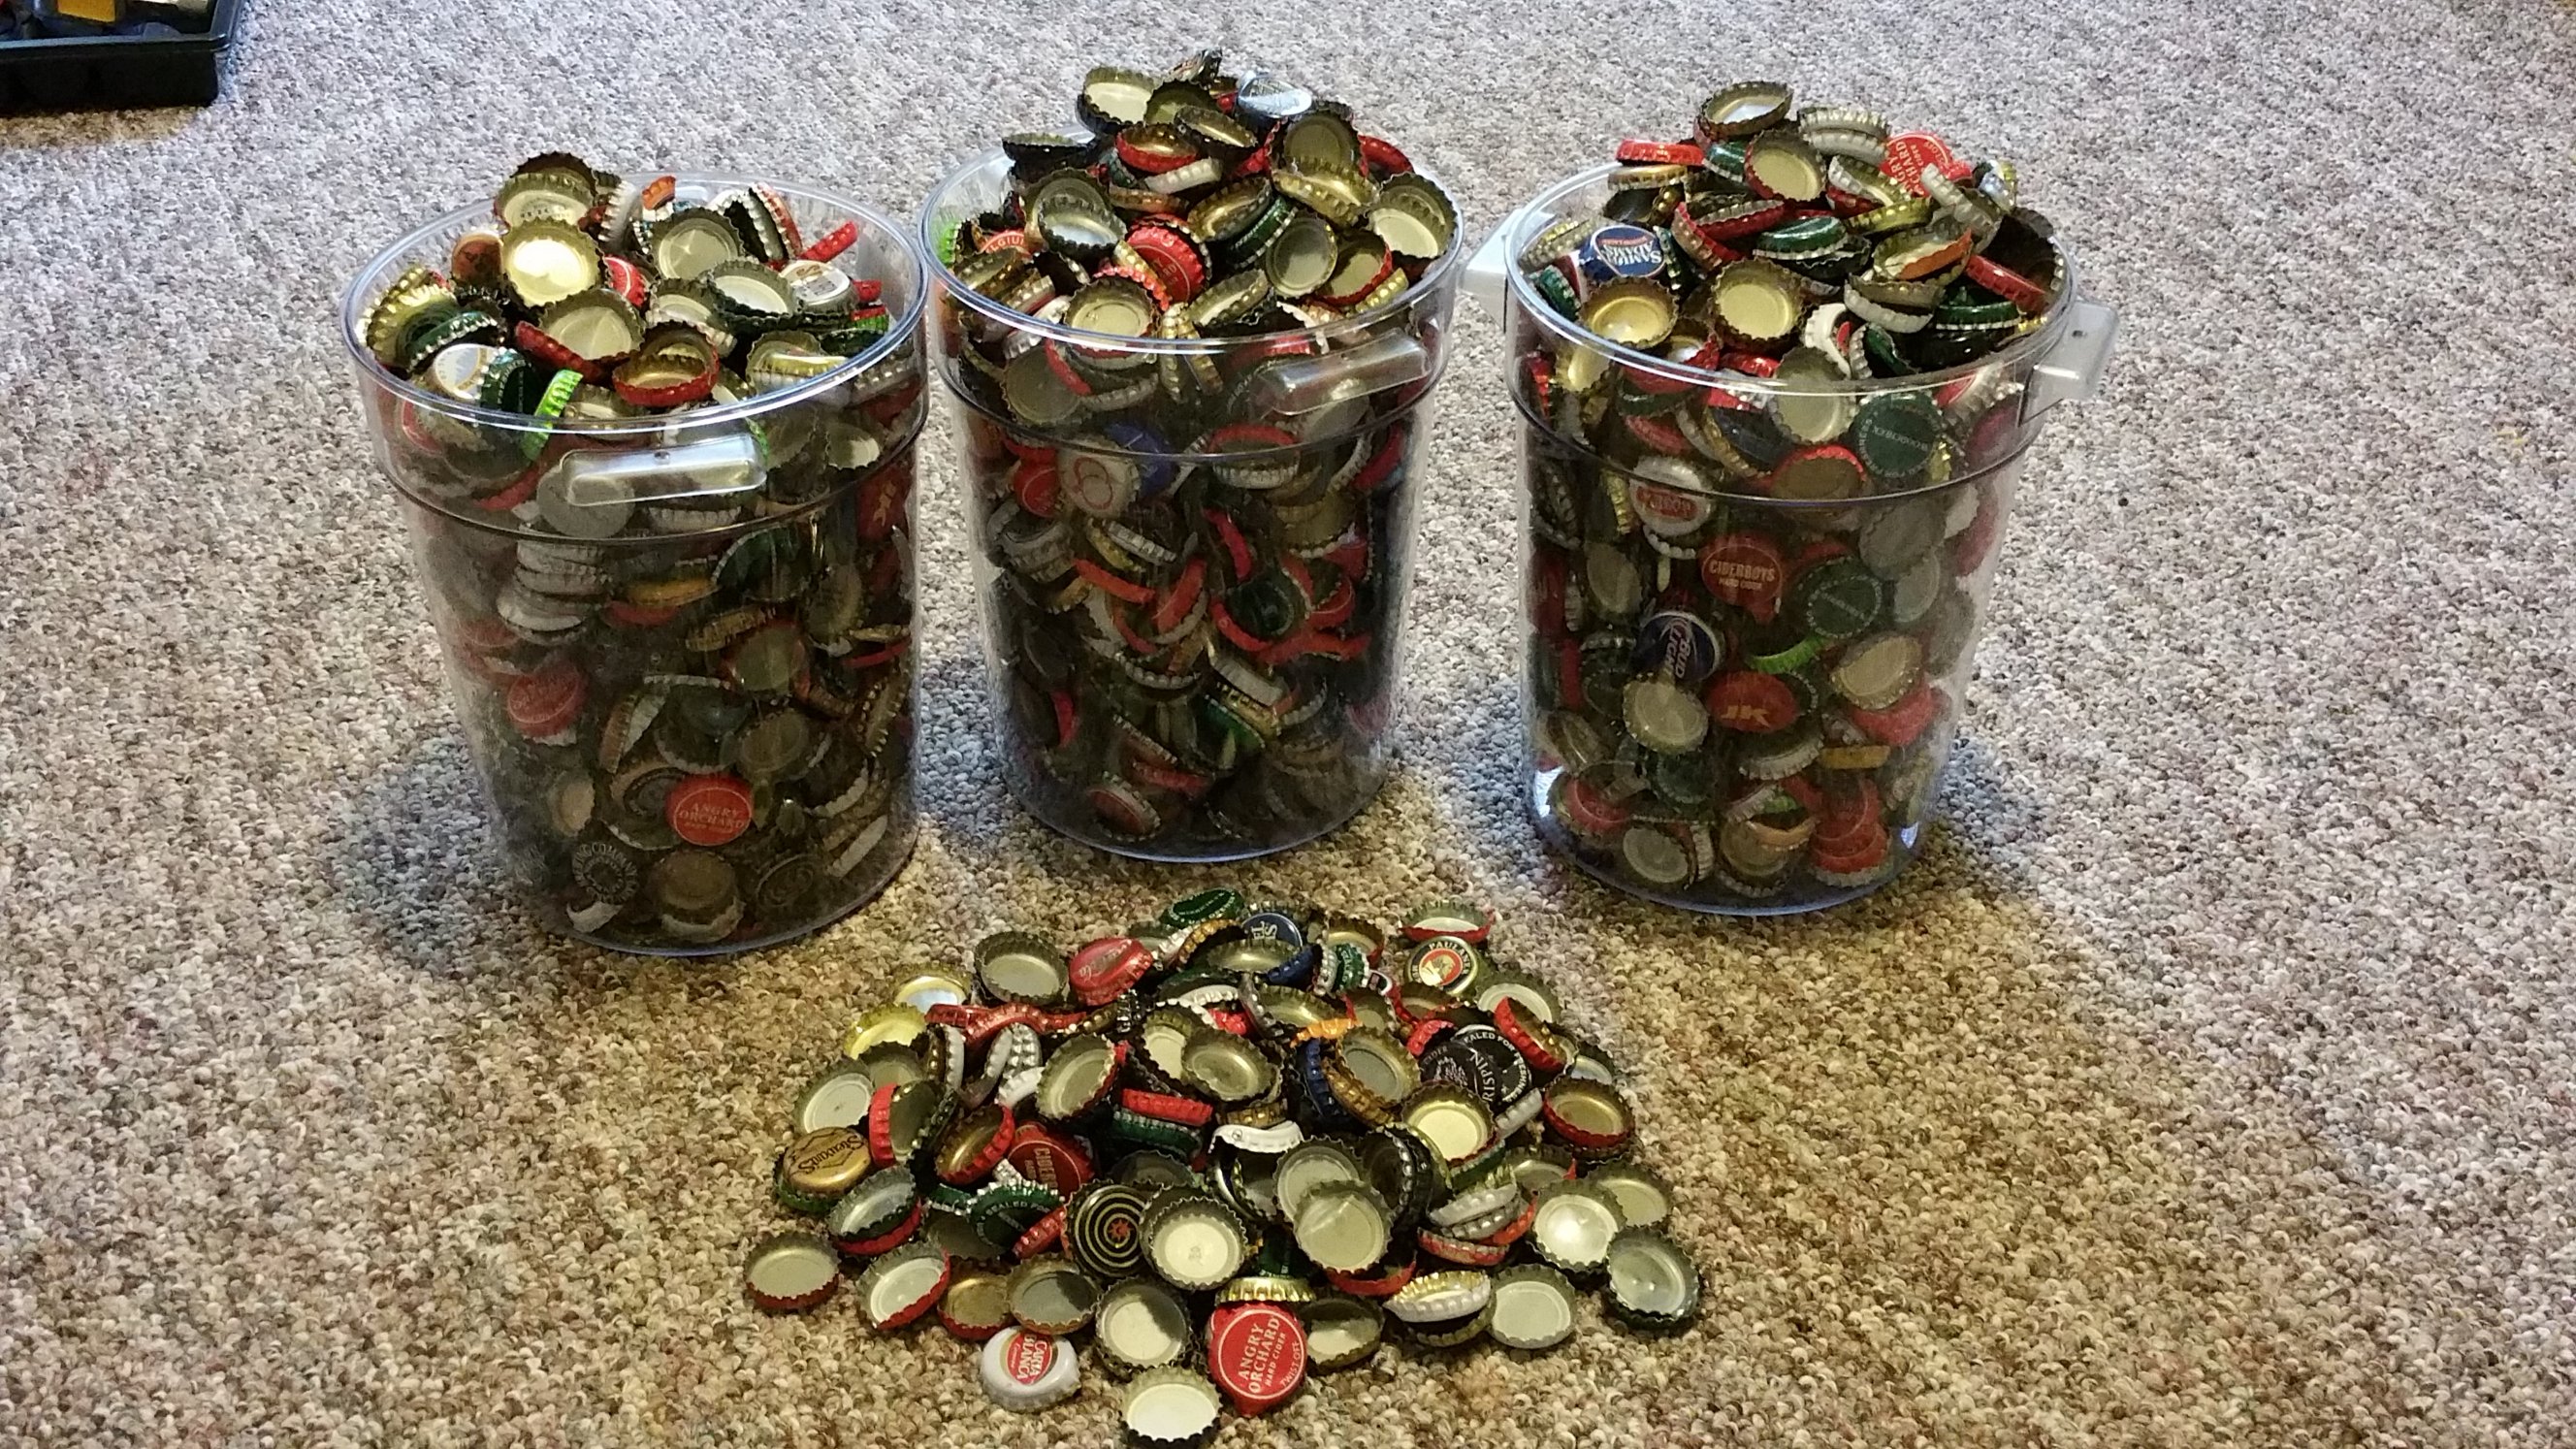 It was 11.2 pounds of bottle caps from about seven years of saving.